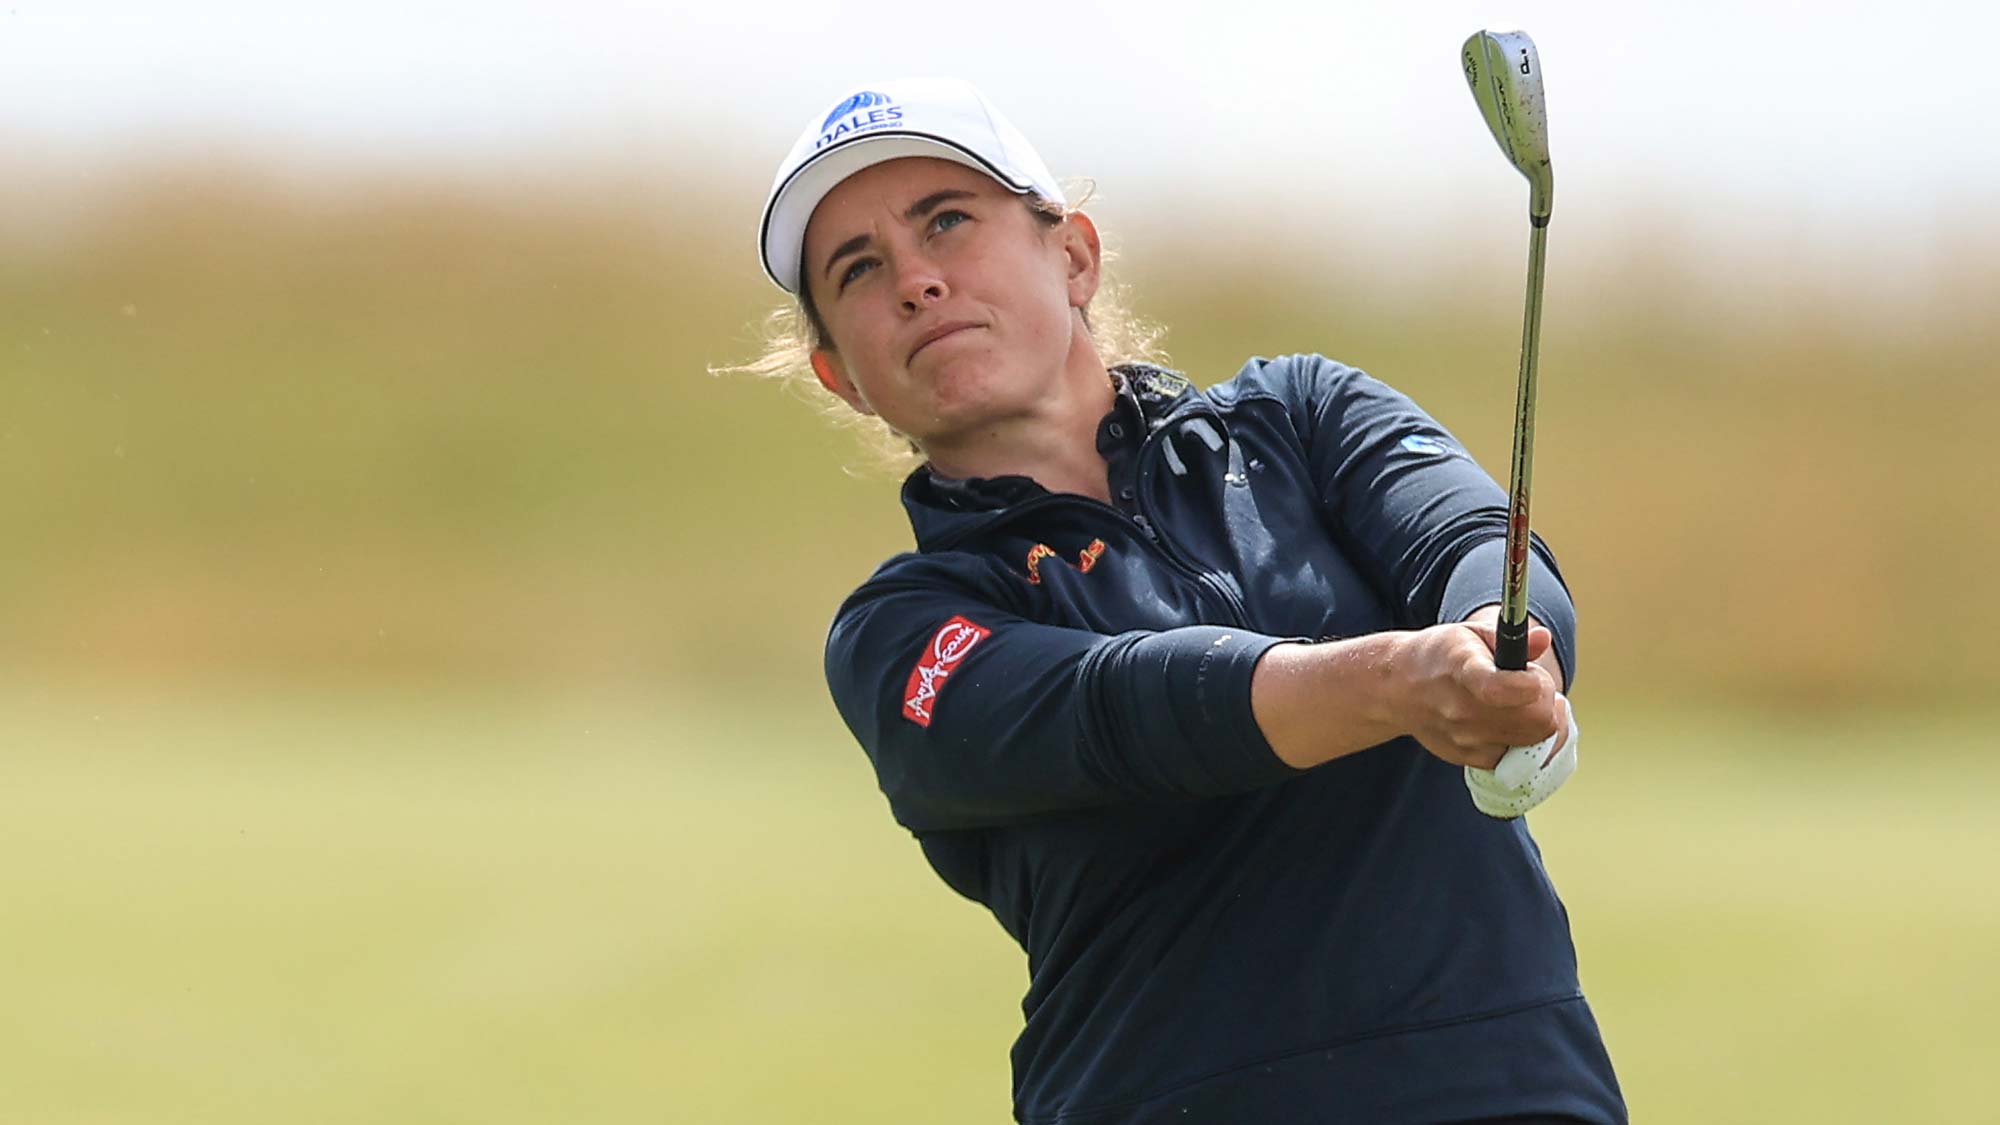 Michelle Thompson of Scotland plays her second shot on the 18th hole during the first round of the Trust Golf Women's Scottish Open